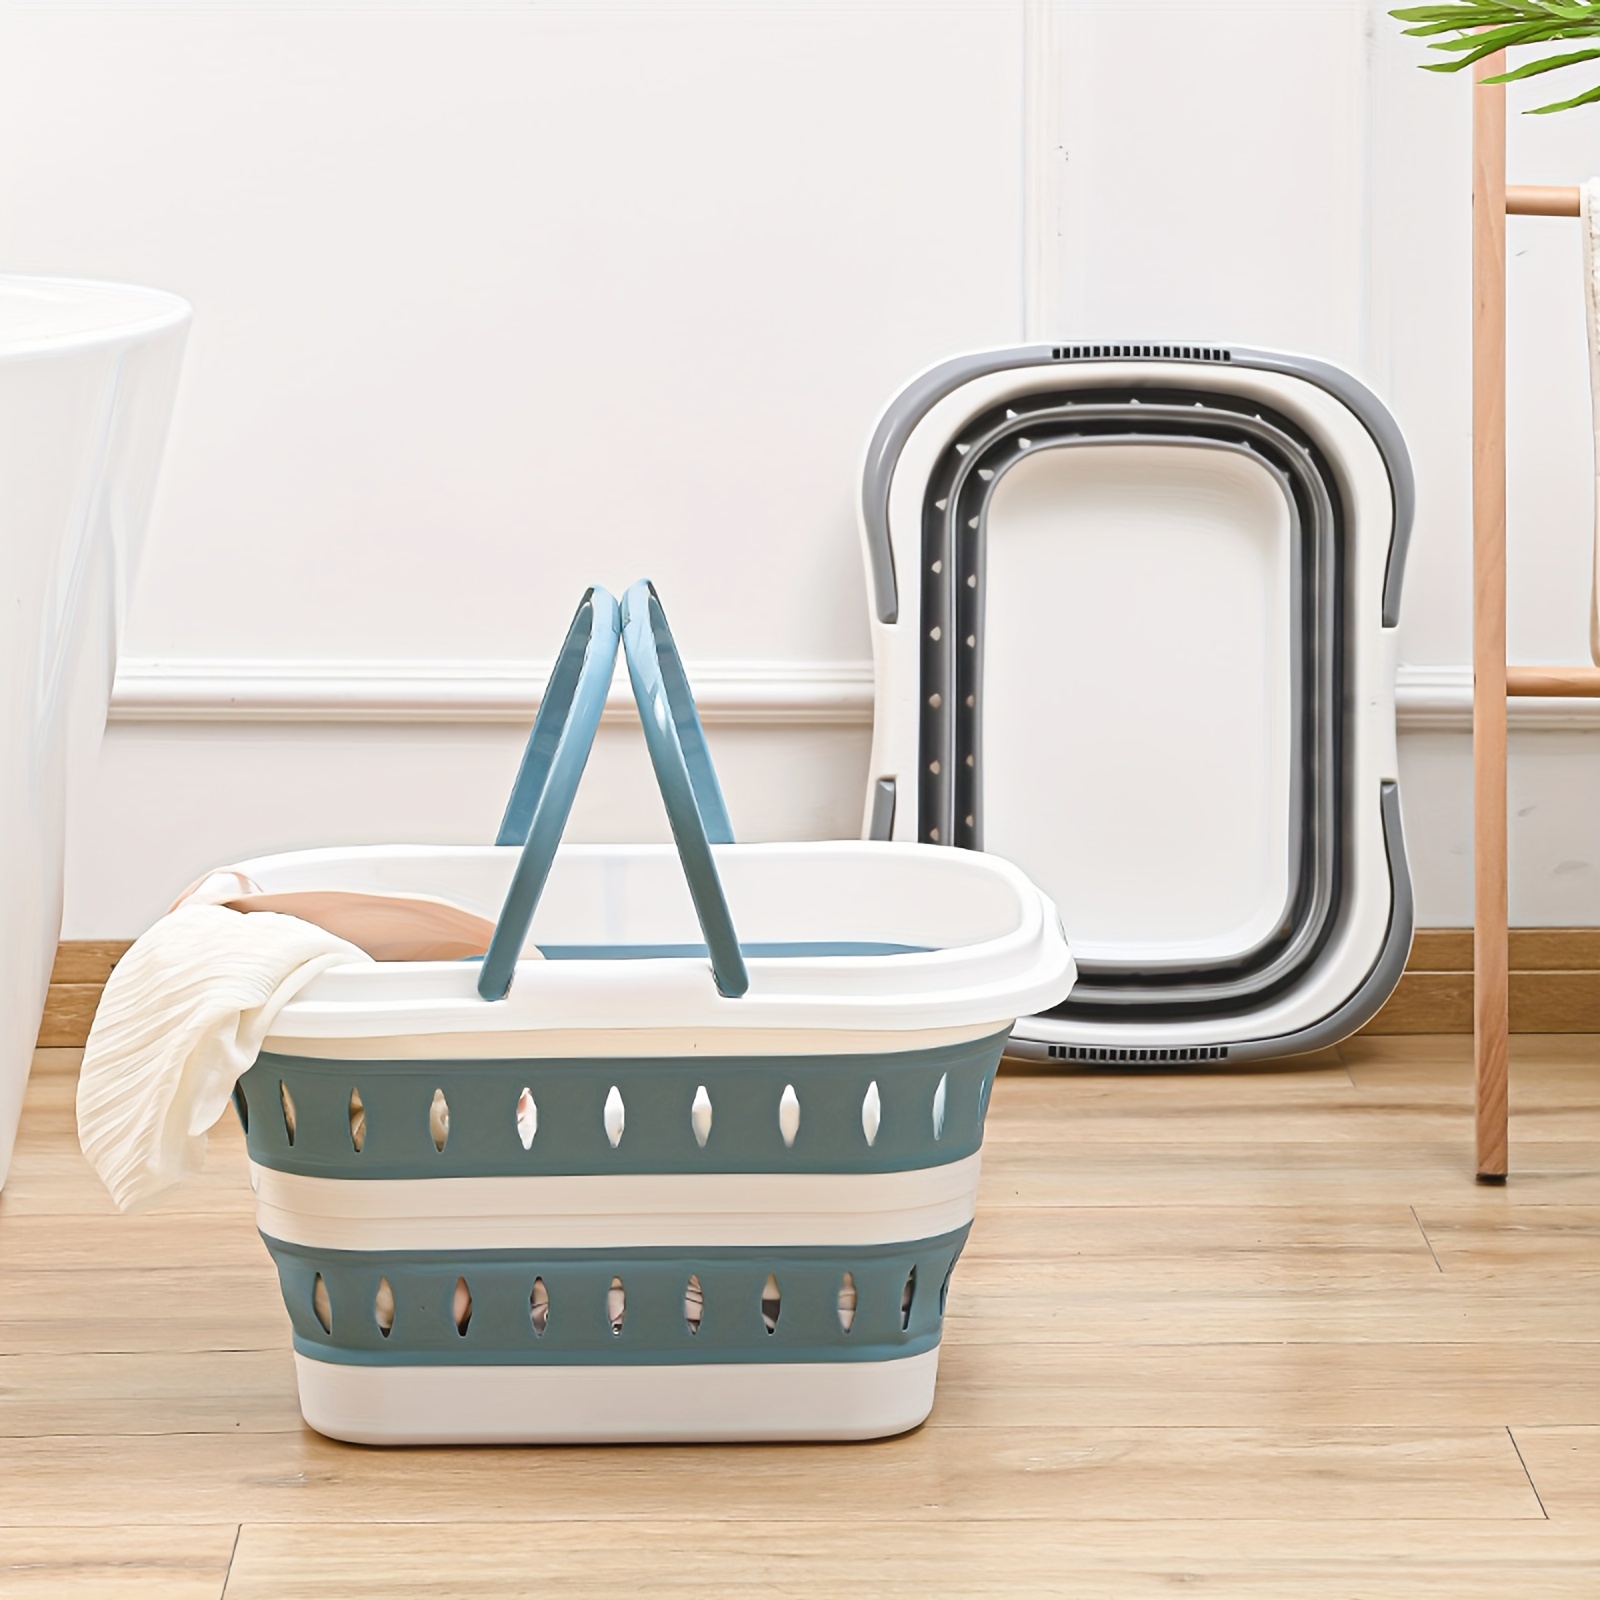 Foldable Dirty Clothes Basket, Small Storage Basket, Portable